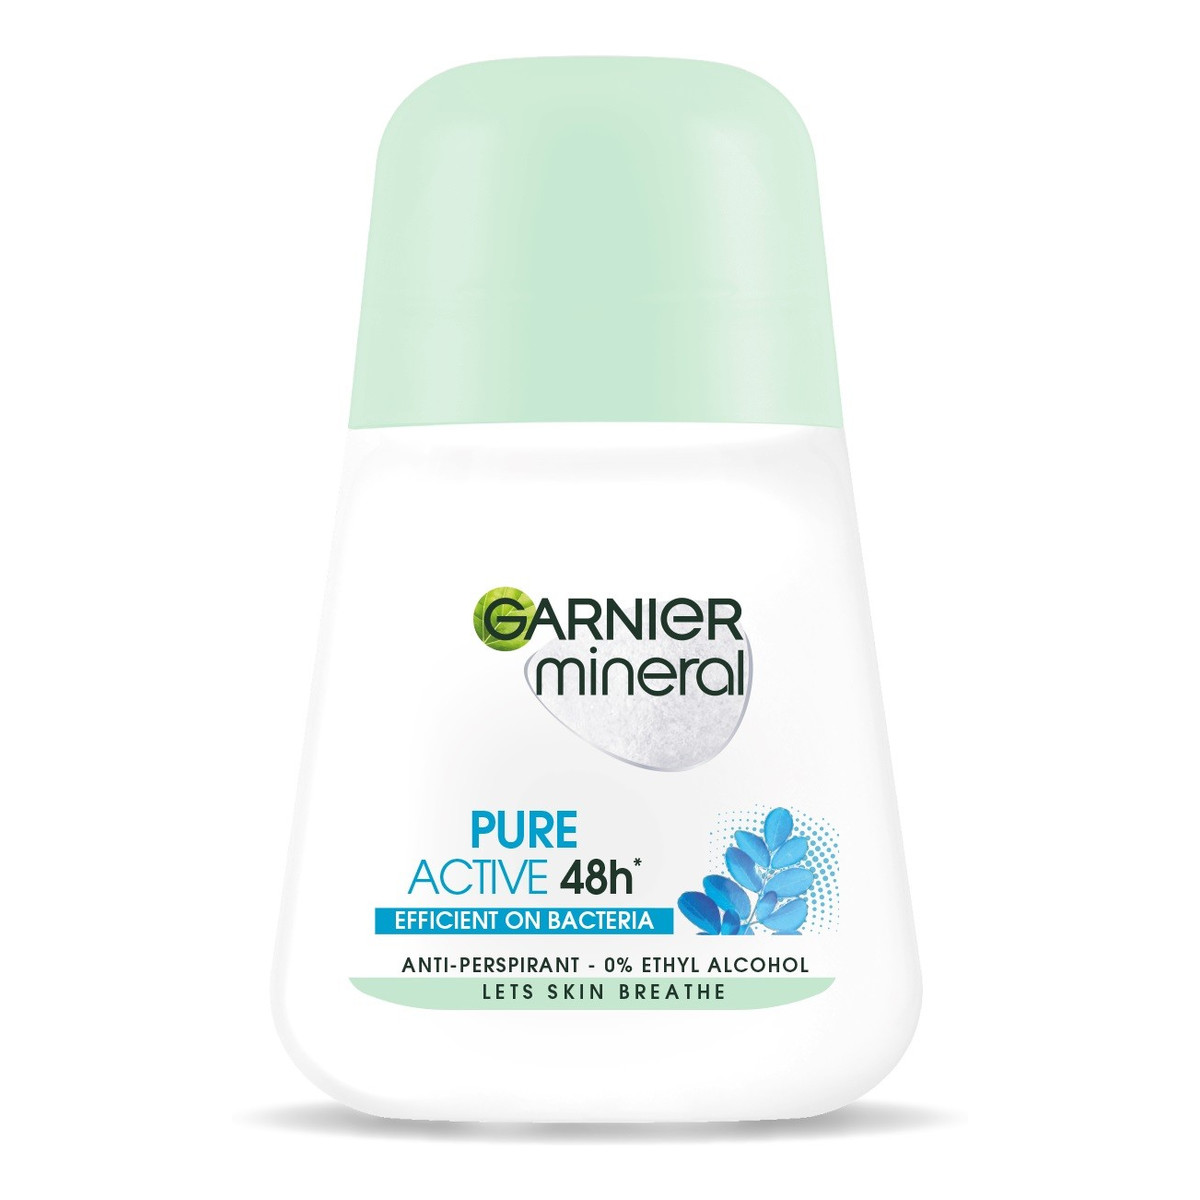 Garnier Mineral Dezodorant roll-on Pure Active 48h - Efficient On Bacteria 50ml